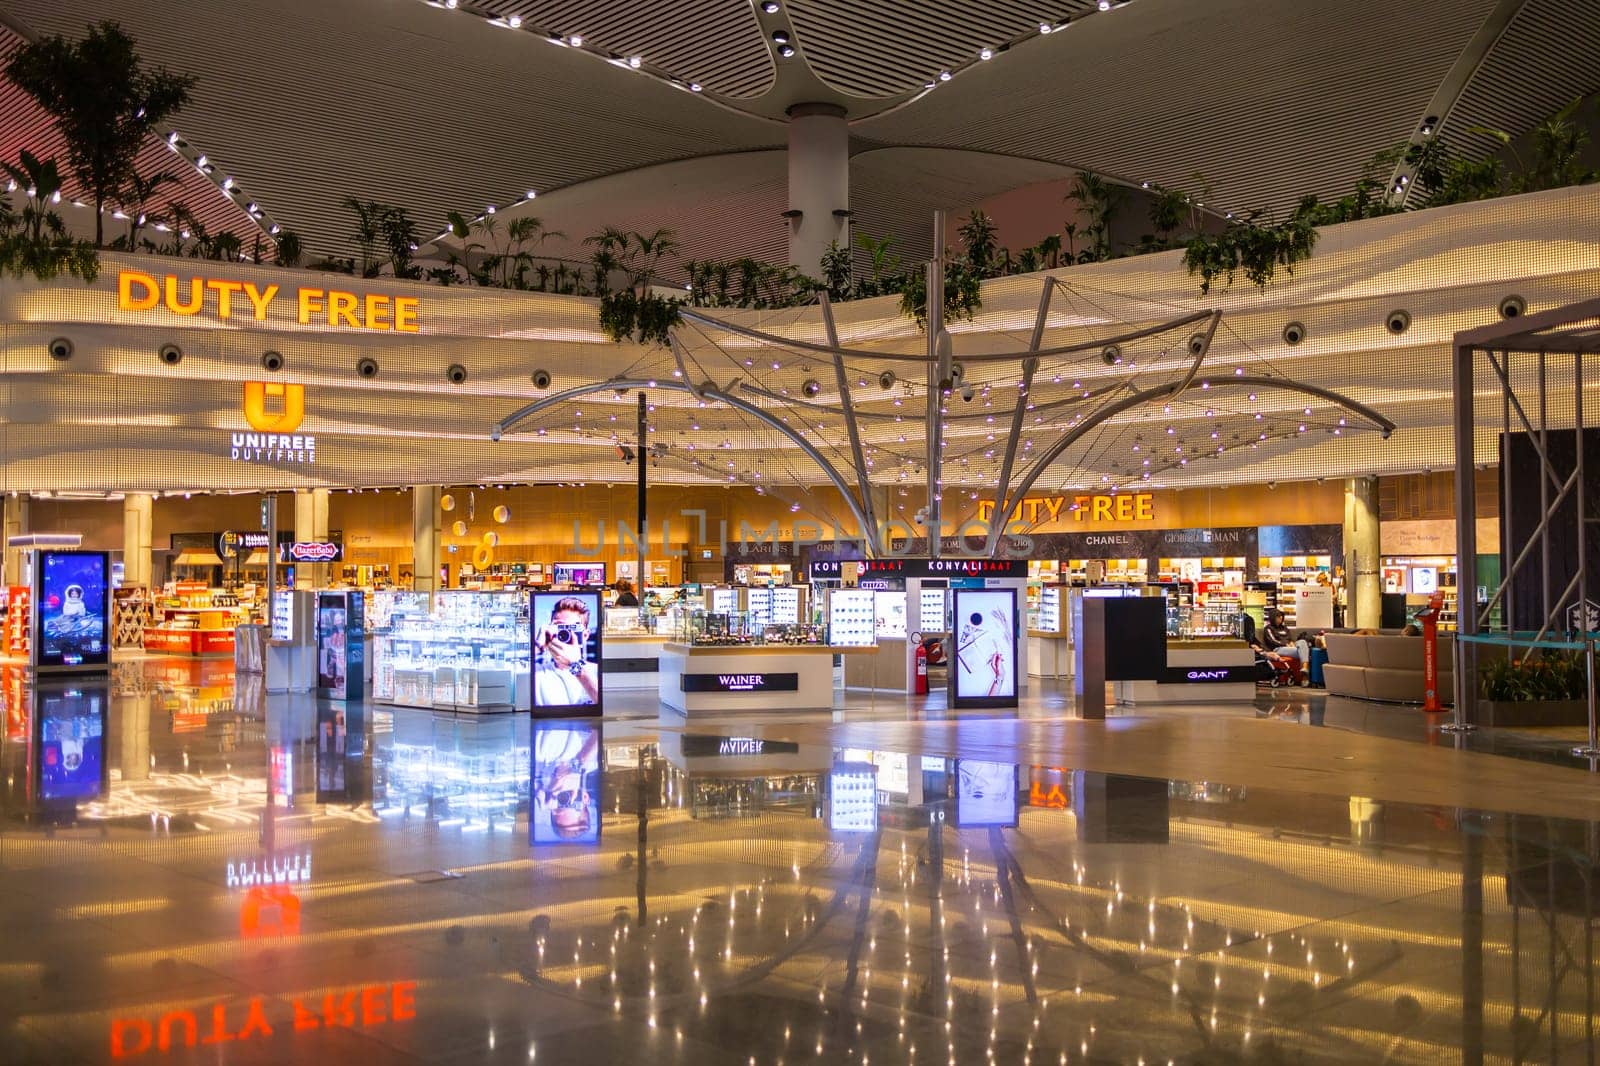 ISTANBUL, TURKEY - August 09, 2022: A view of duty free shops and stores at the international departure terminal of New International Istanbul Airport